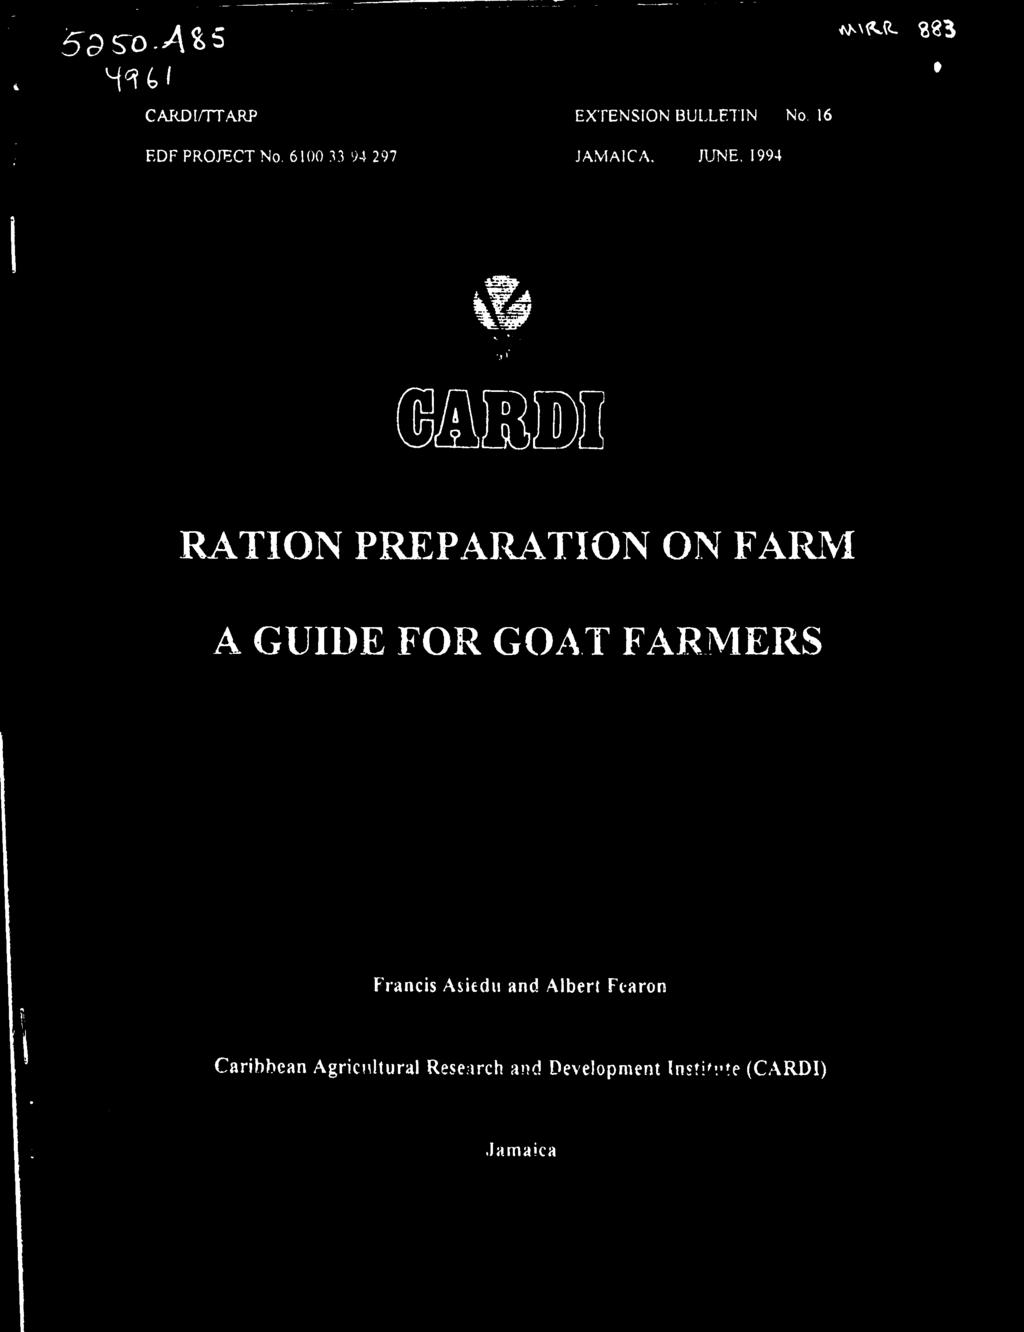 GUIDE FOR GOAT FARMERS Francis Asifdu and